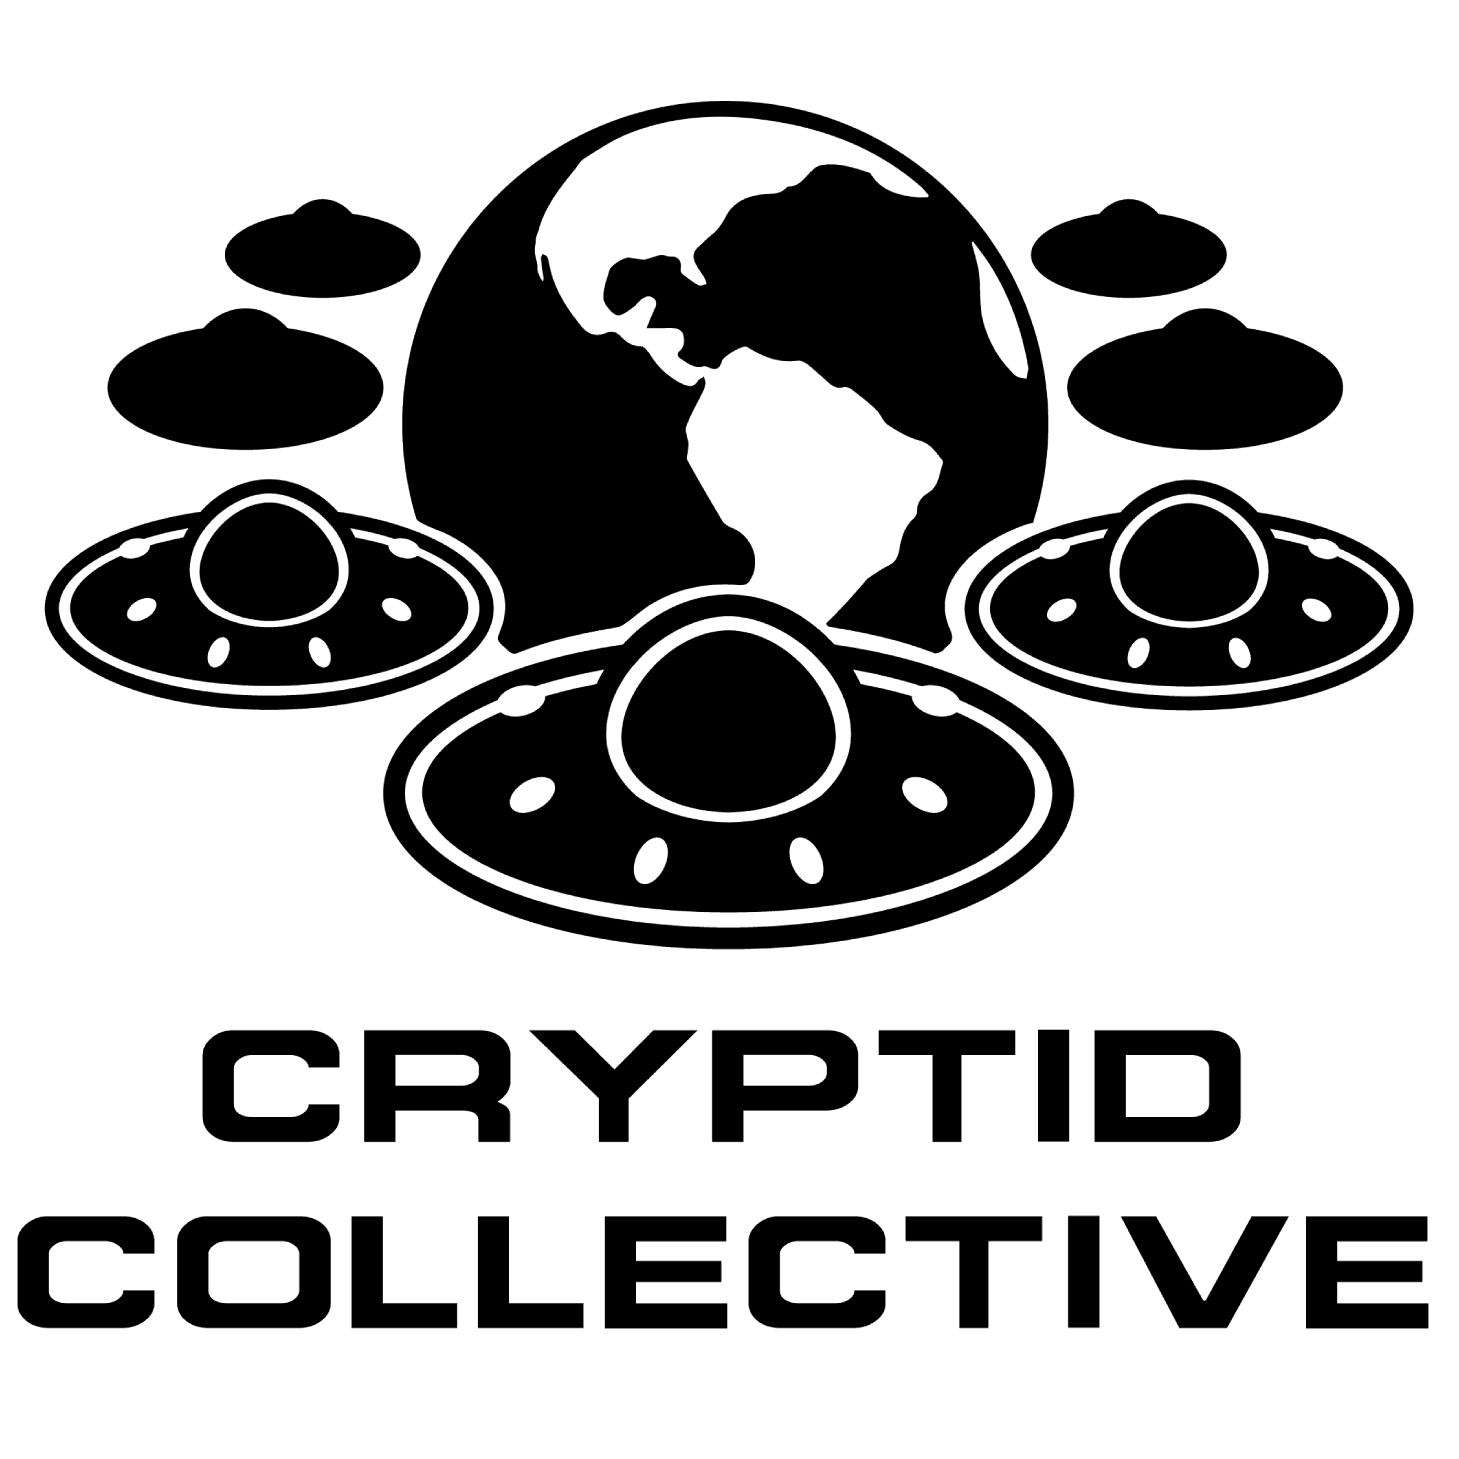 The Cryptid Collective Official